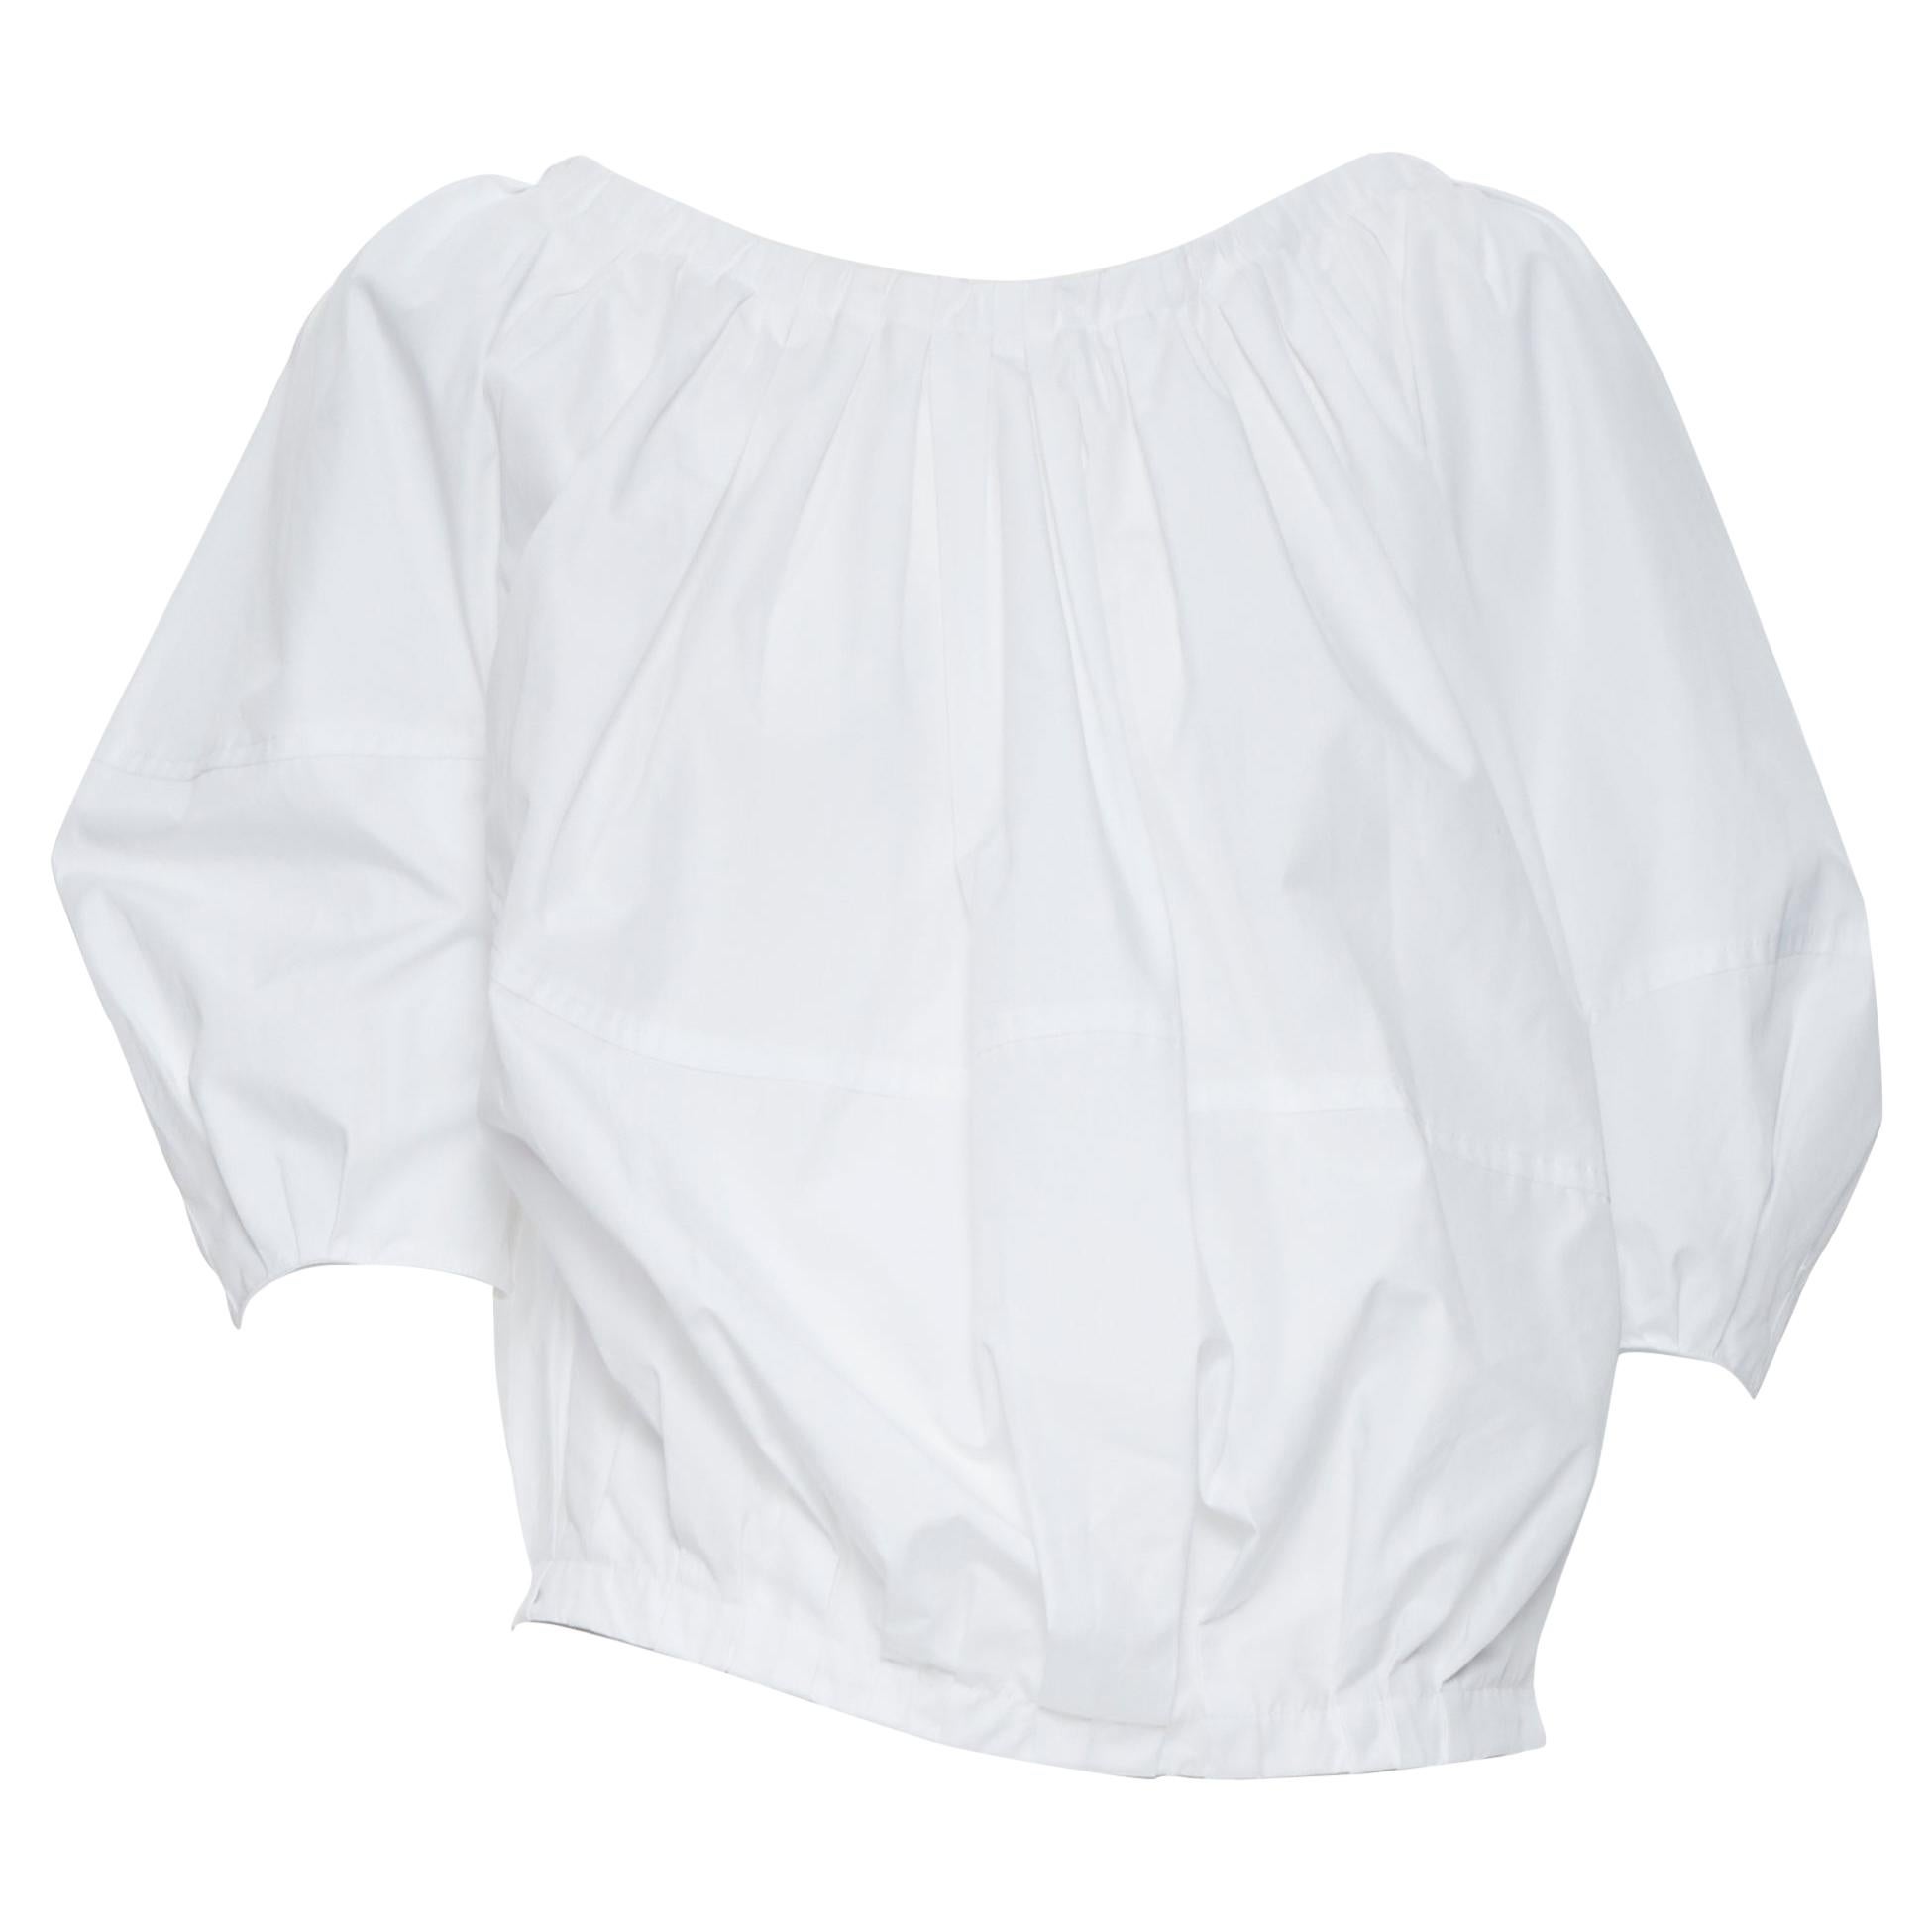 MARNI 2020 white cotton voluminous assymetric bubble cut top IT40
Brand: Marni
Model Name / Style: Bubble top
Material: Cotton
Color: White
Pattern: Solid
Extra Detail: Bubble top.
Made in: Italy

CONDITION: 
Condition: Very good, this item was